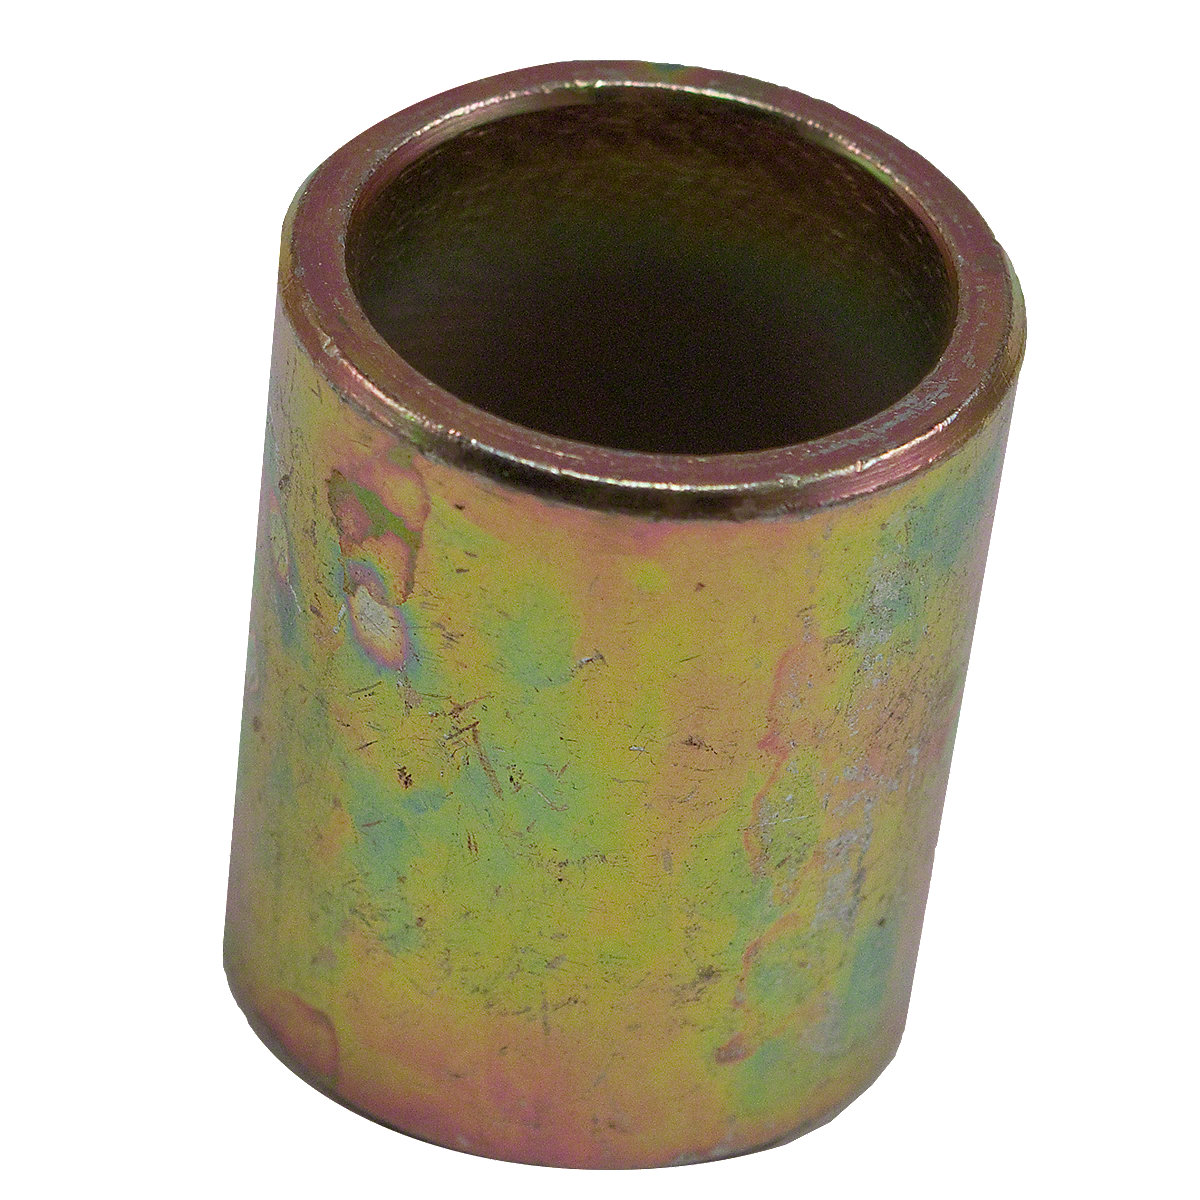 3 Pt Lift Arm Reducer Bushing, Category 2 To Category 1)